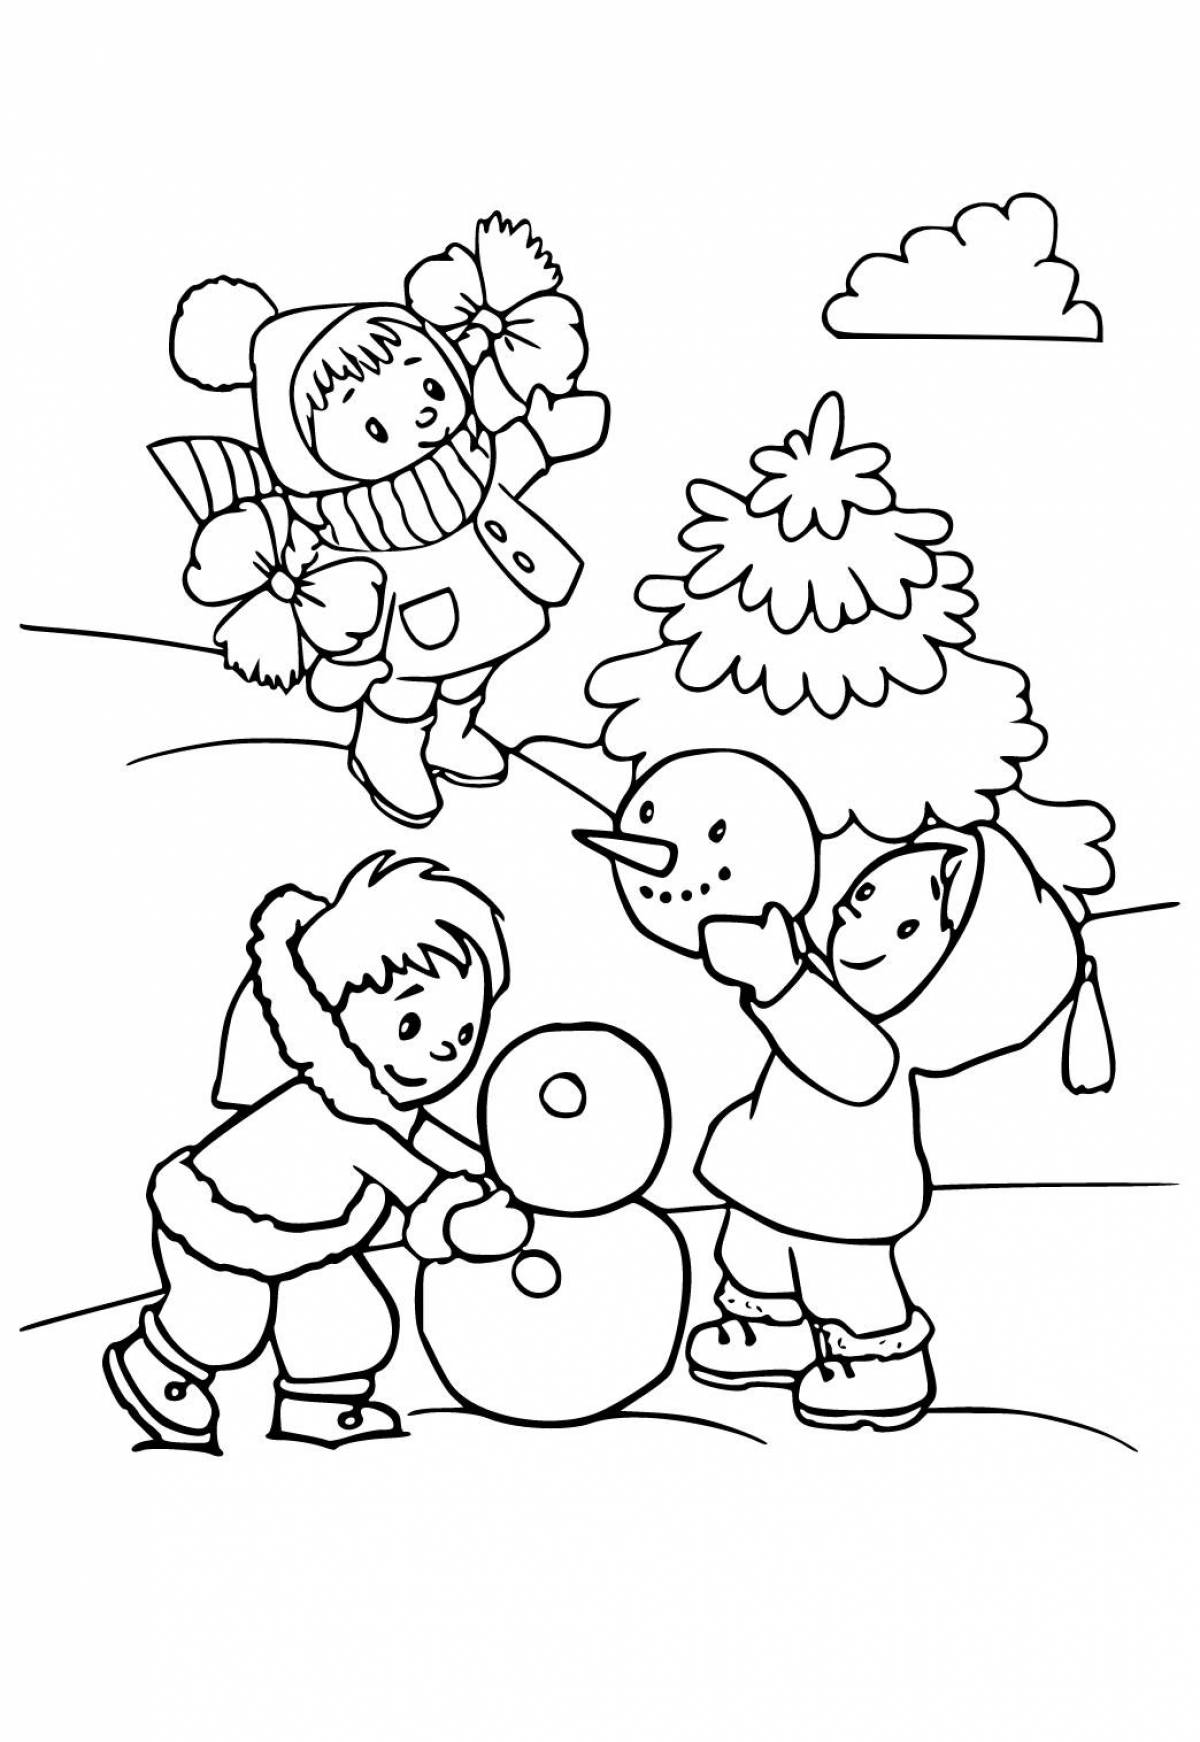 Glittering snow hill coloring page